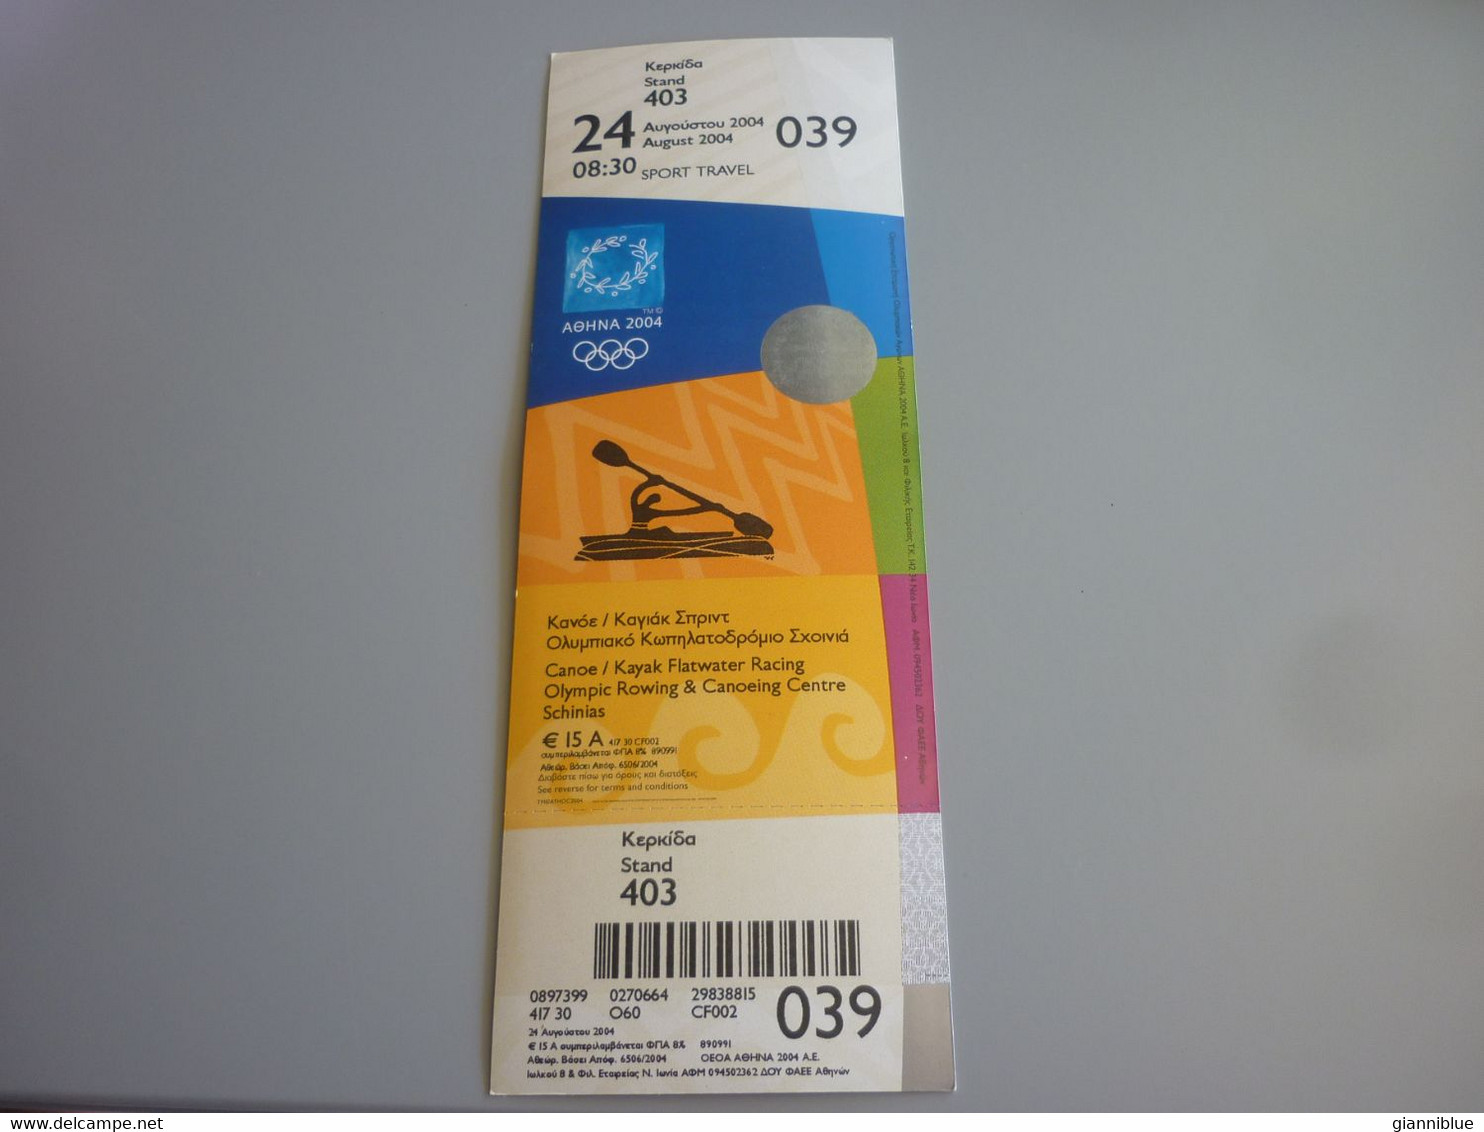 Canoe Kayak Flatwater Racing Athens 2004 Olympic Games Greece Greek Mint Unused Match Ticket Stub 24/08/2004 08:30 #039 - Apparel, Souvenirs & Other